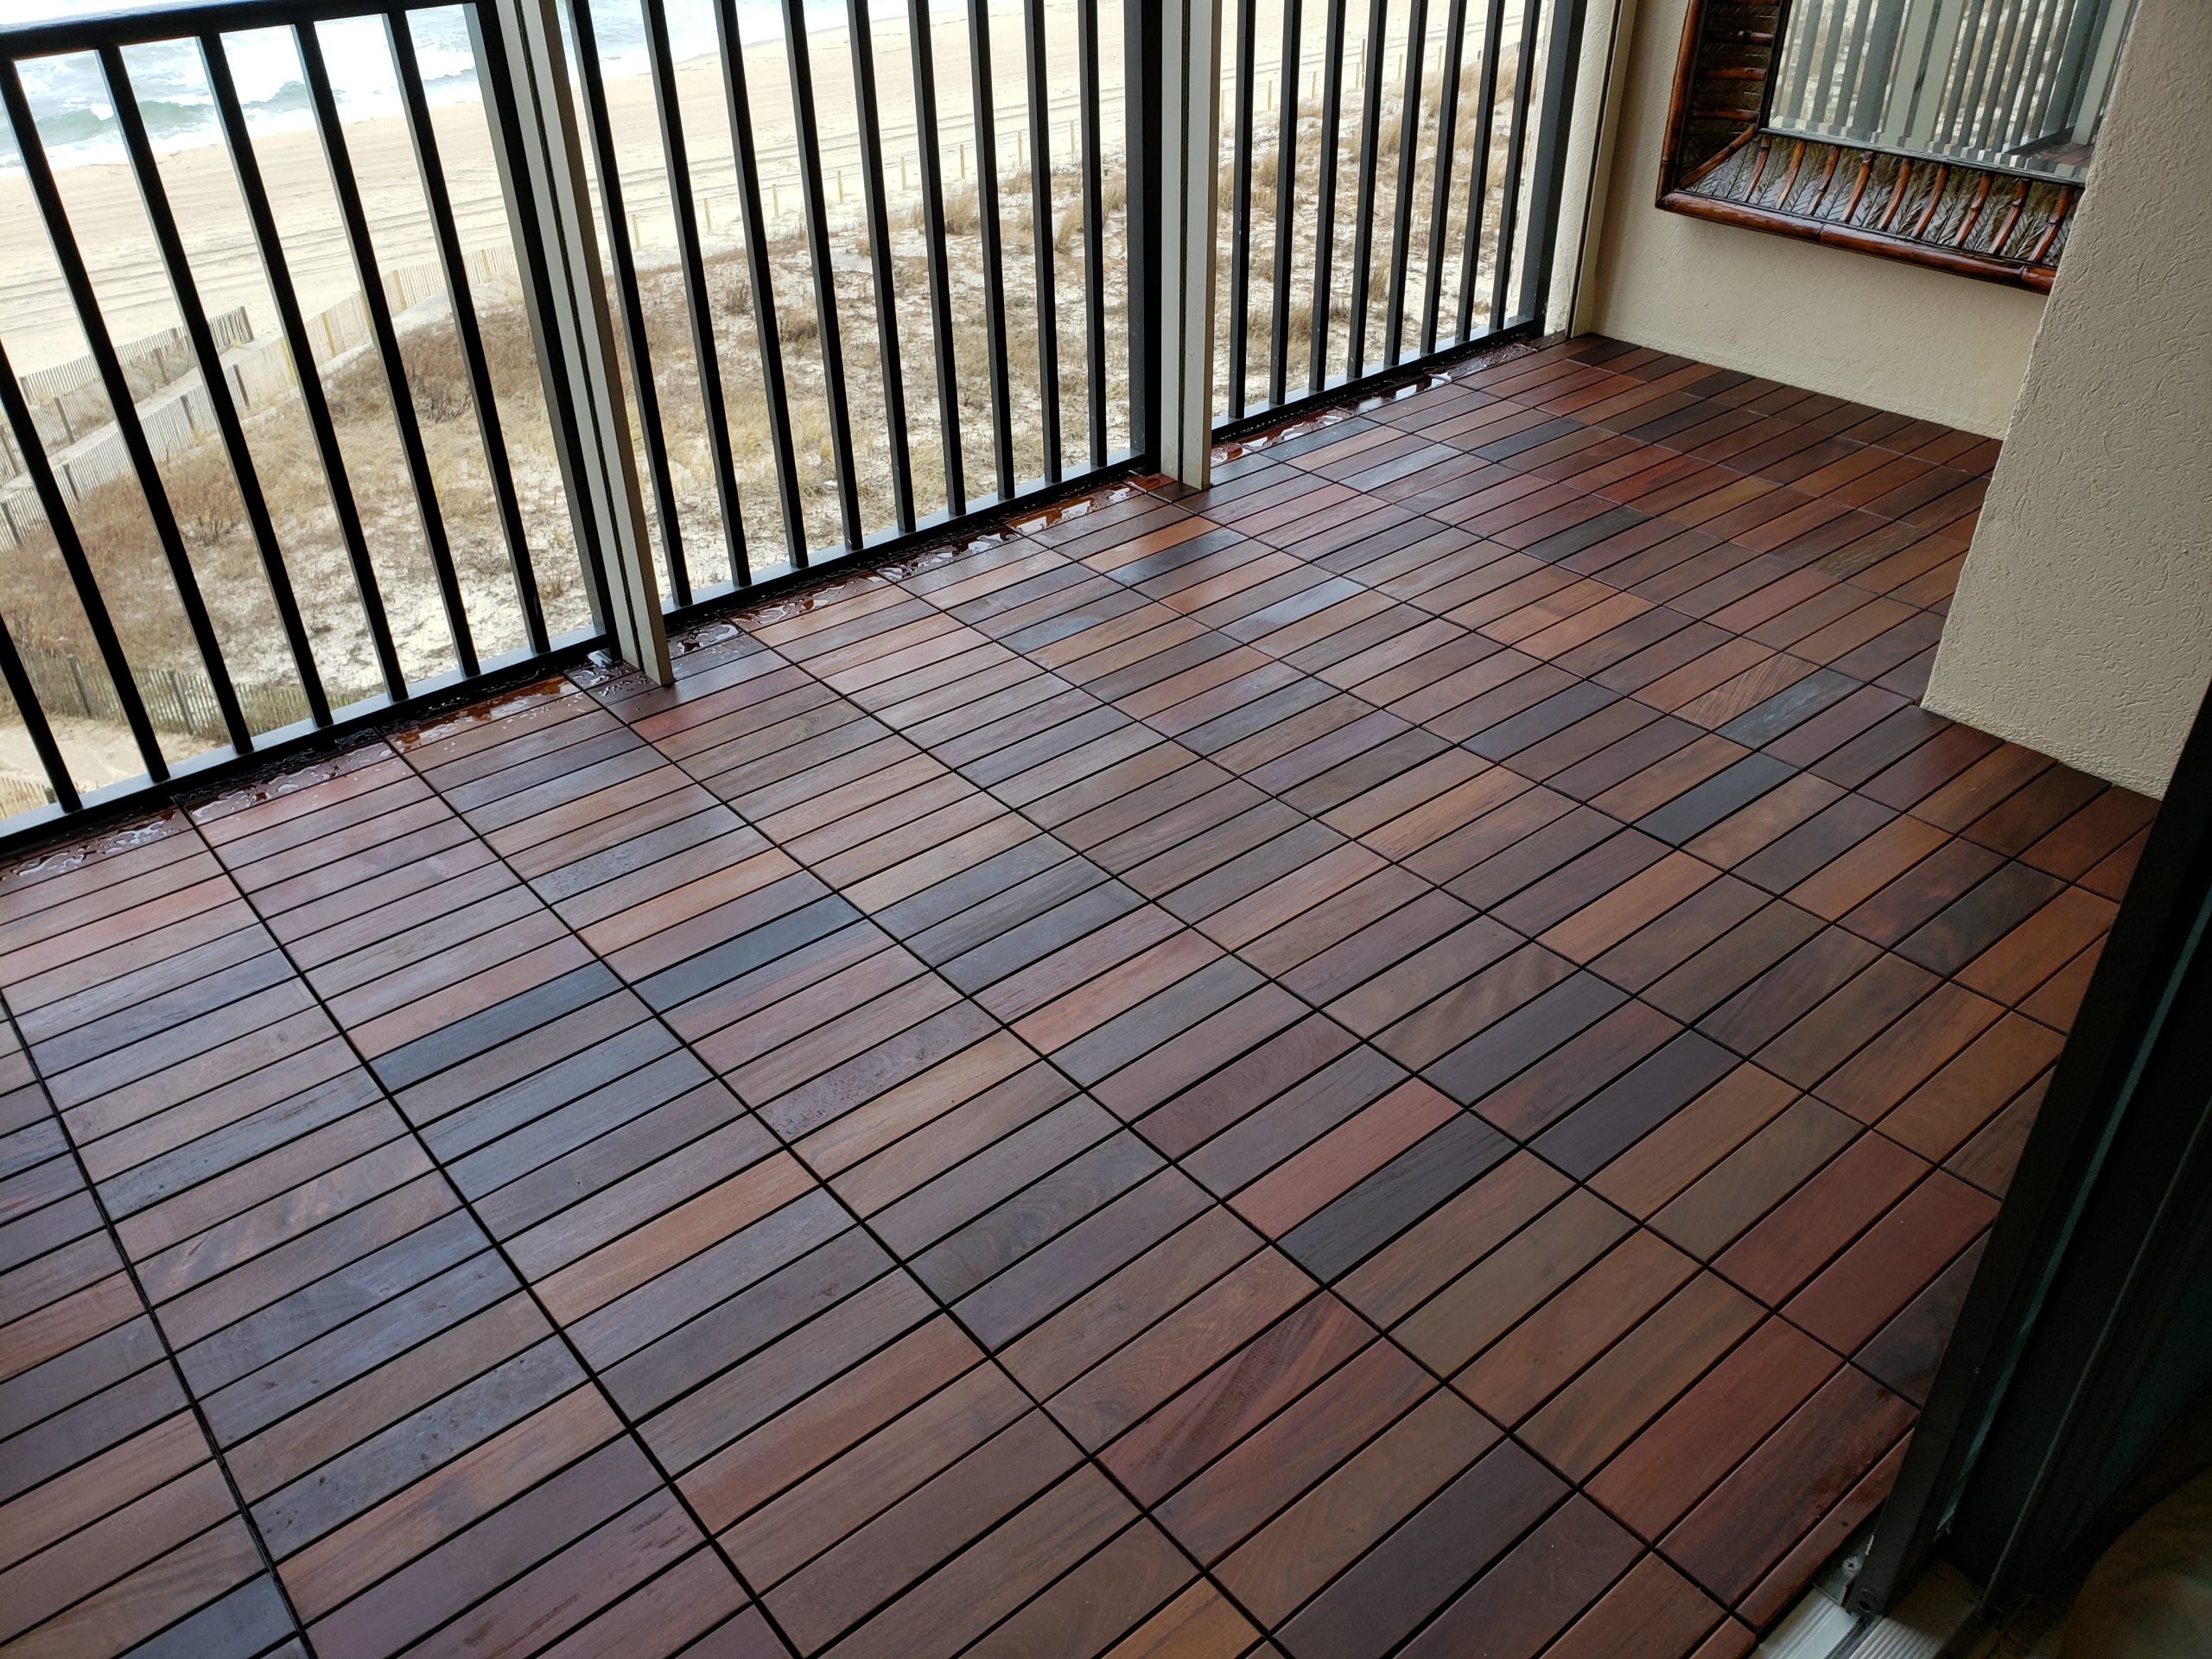 Showcase Ipe Wood Deck Tiles Coverdeck Systems